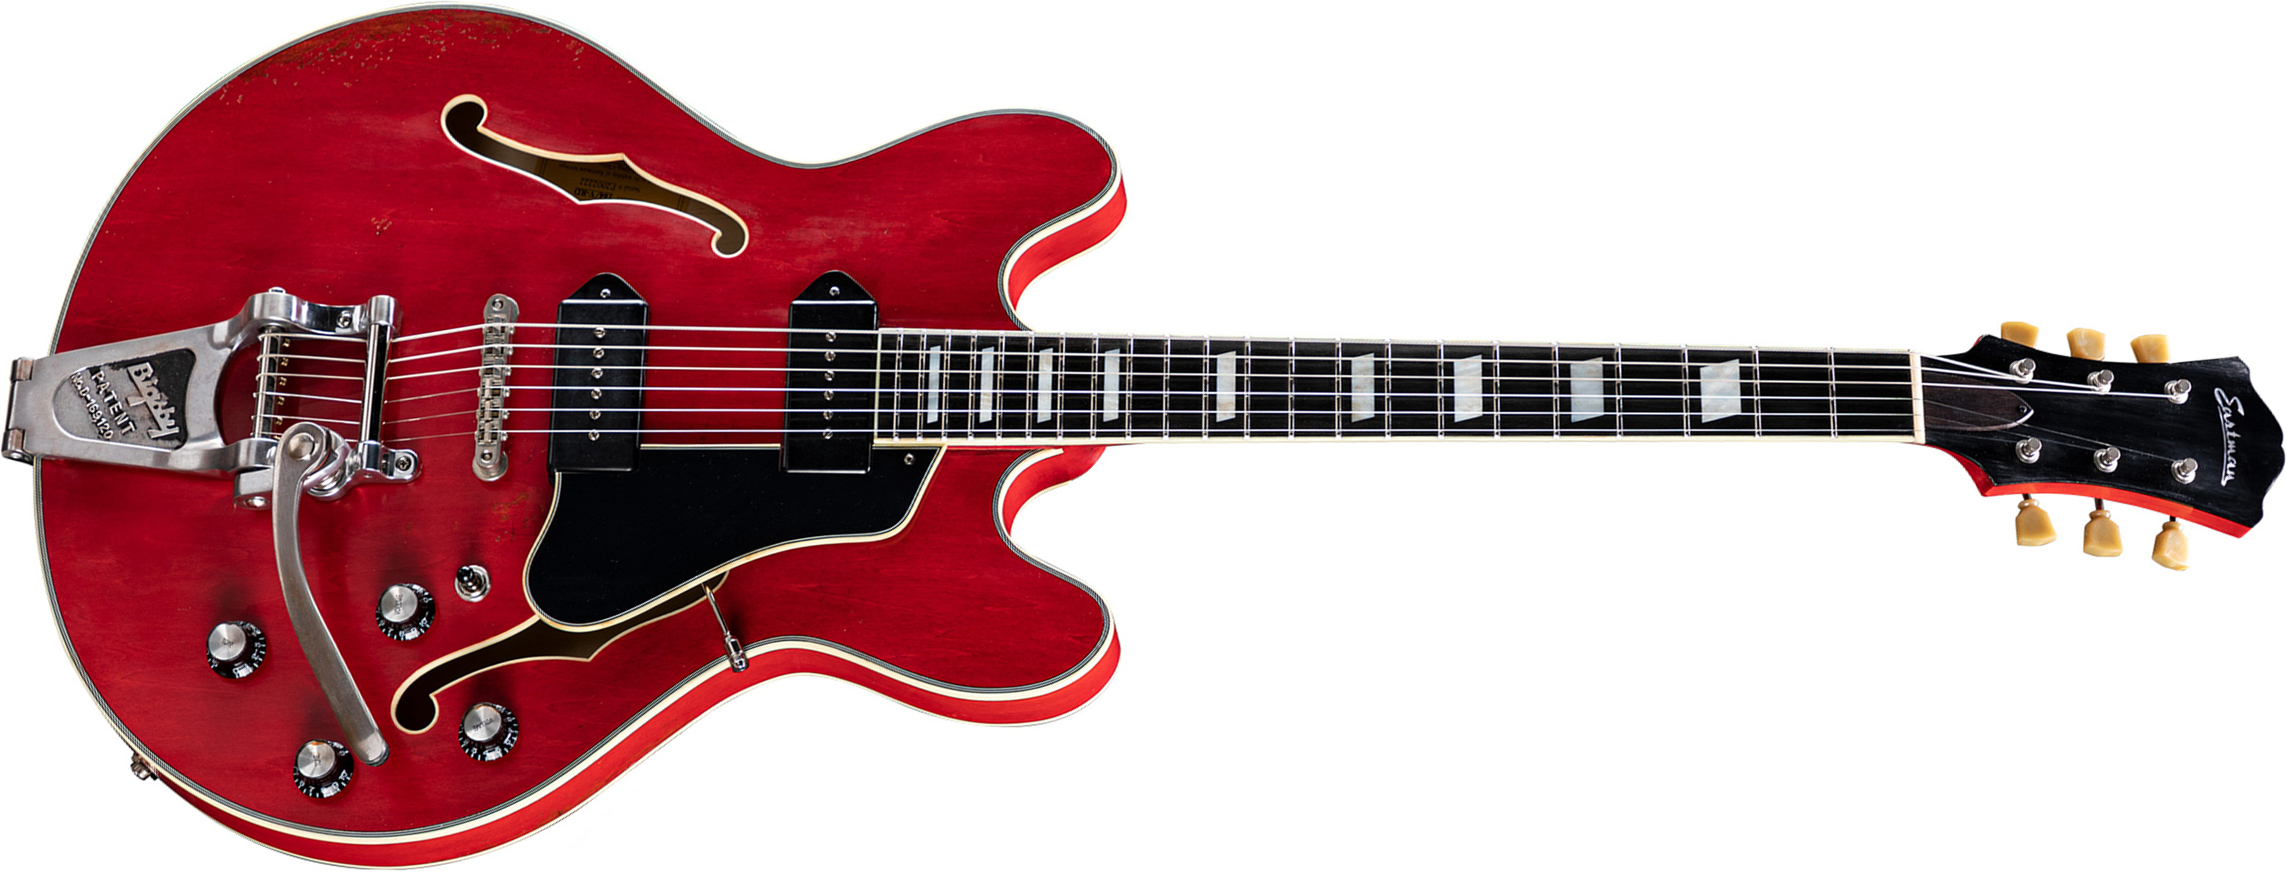 Eastman T64/v Thinline Laminate Tout Erable Bigsby 2p90 Lollar Bigsby Eb - Red - Guitarra eléctrica semi caja - Main picture